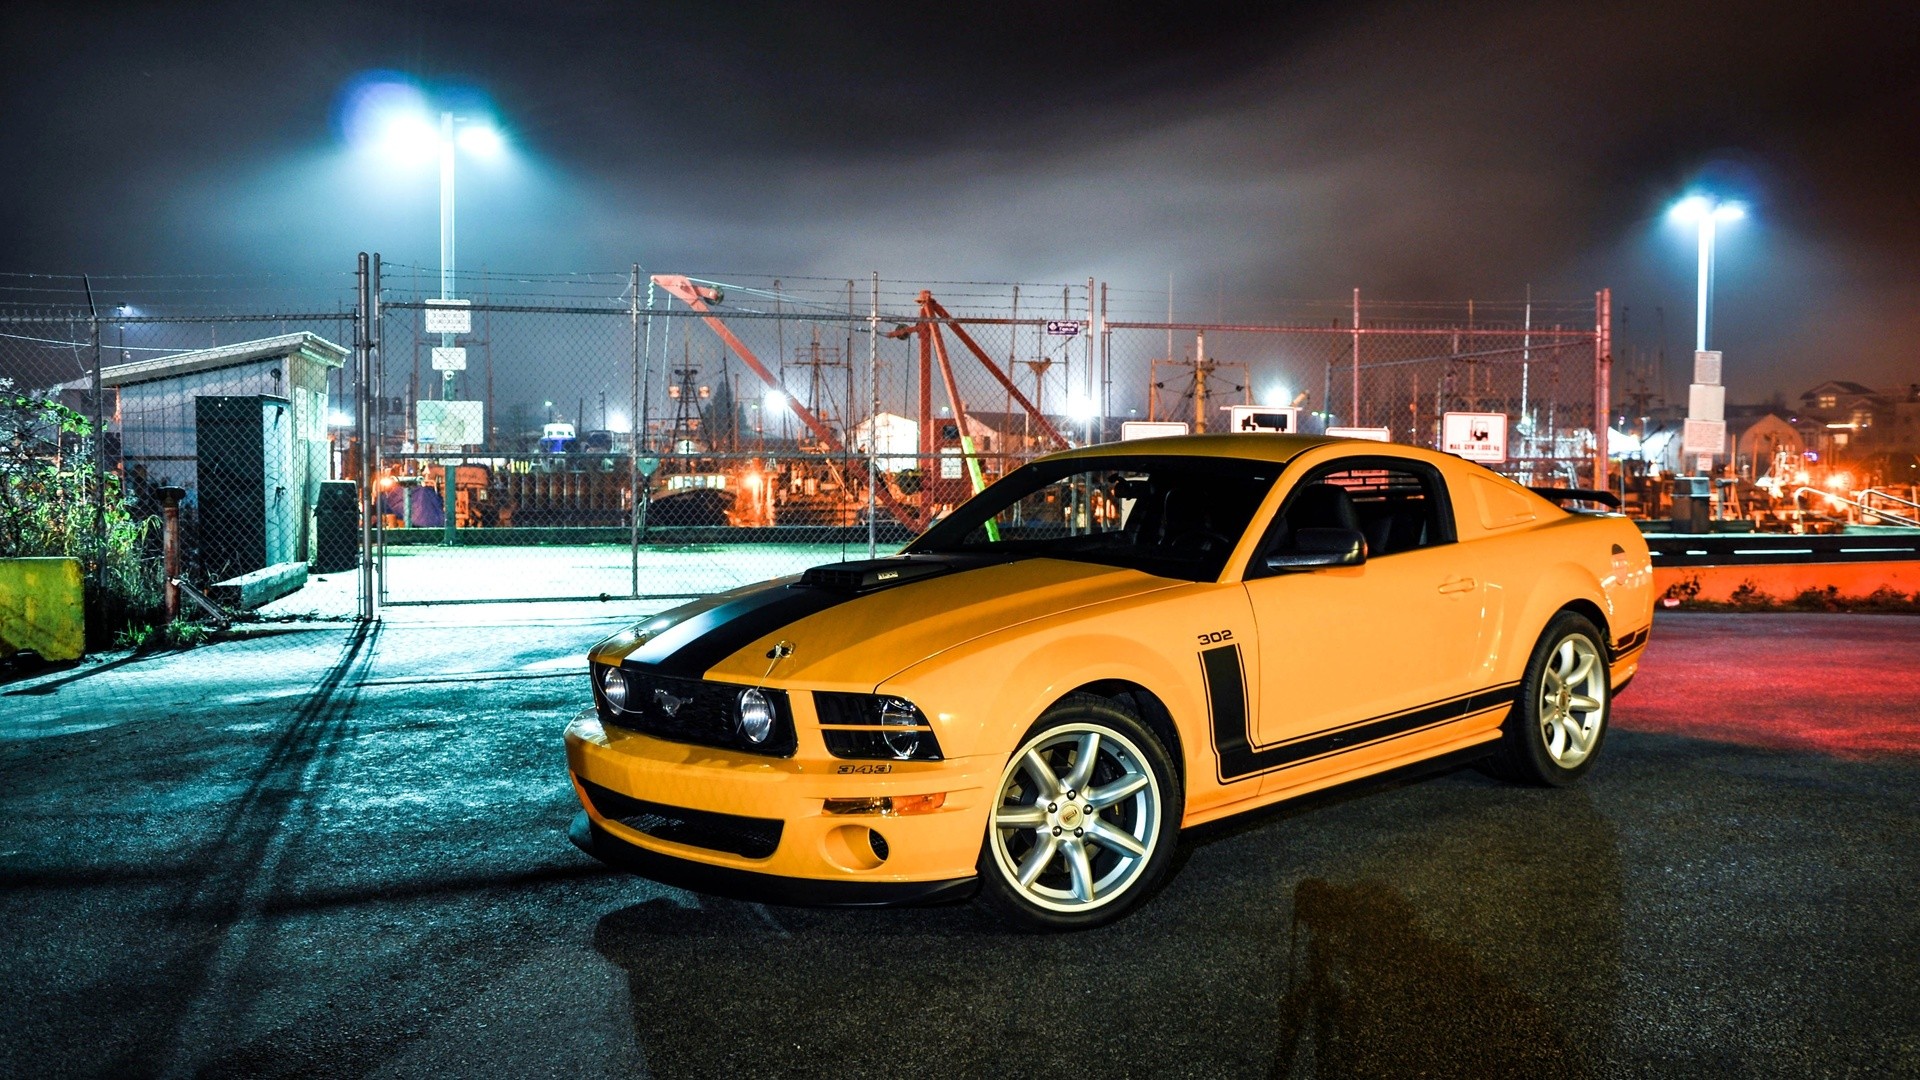 General 1920x1080 car yellow cars night vehicle Ford Ford Mustang muscle cars American cars racing stripes